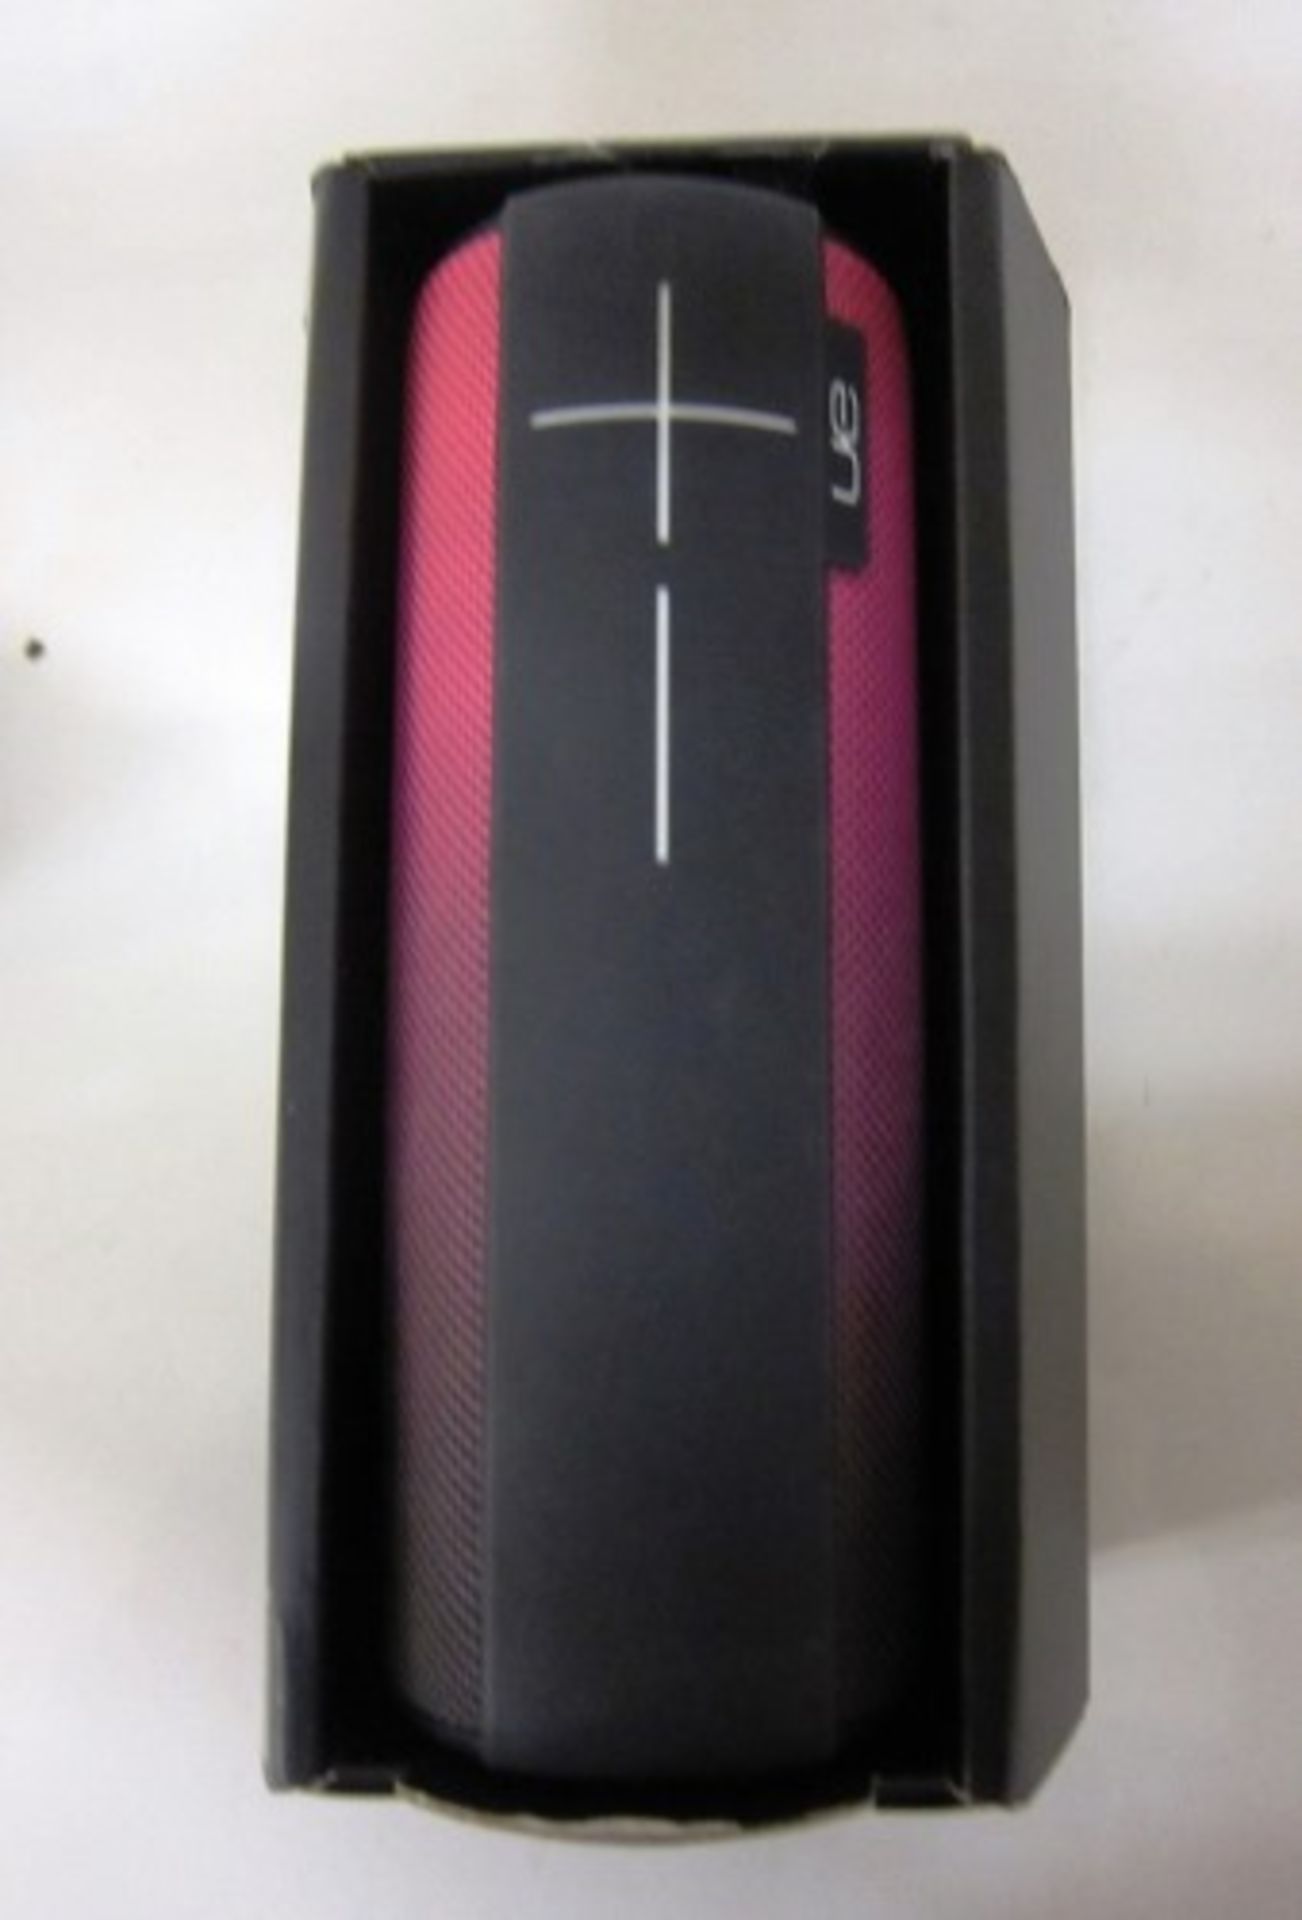 UE Megaboom portable bluetooth speaker in midnight Magenta pink colour. Used very good condition, - Image 2 of 2